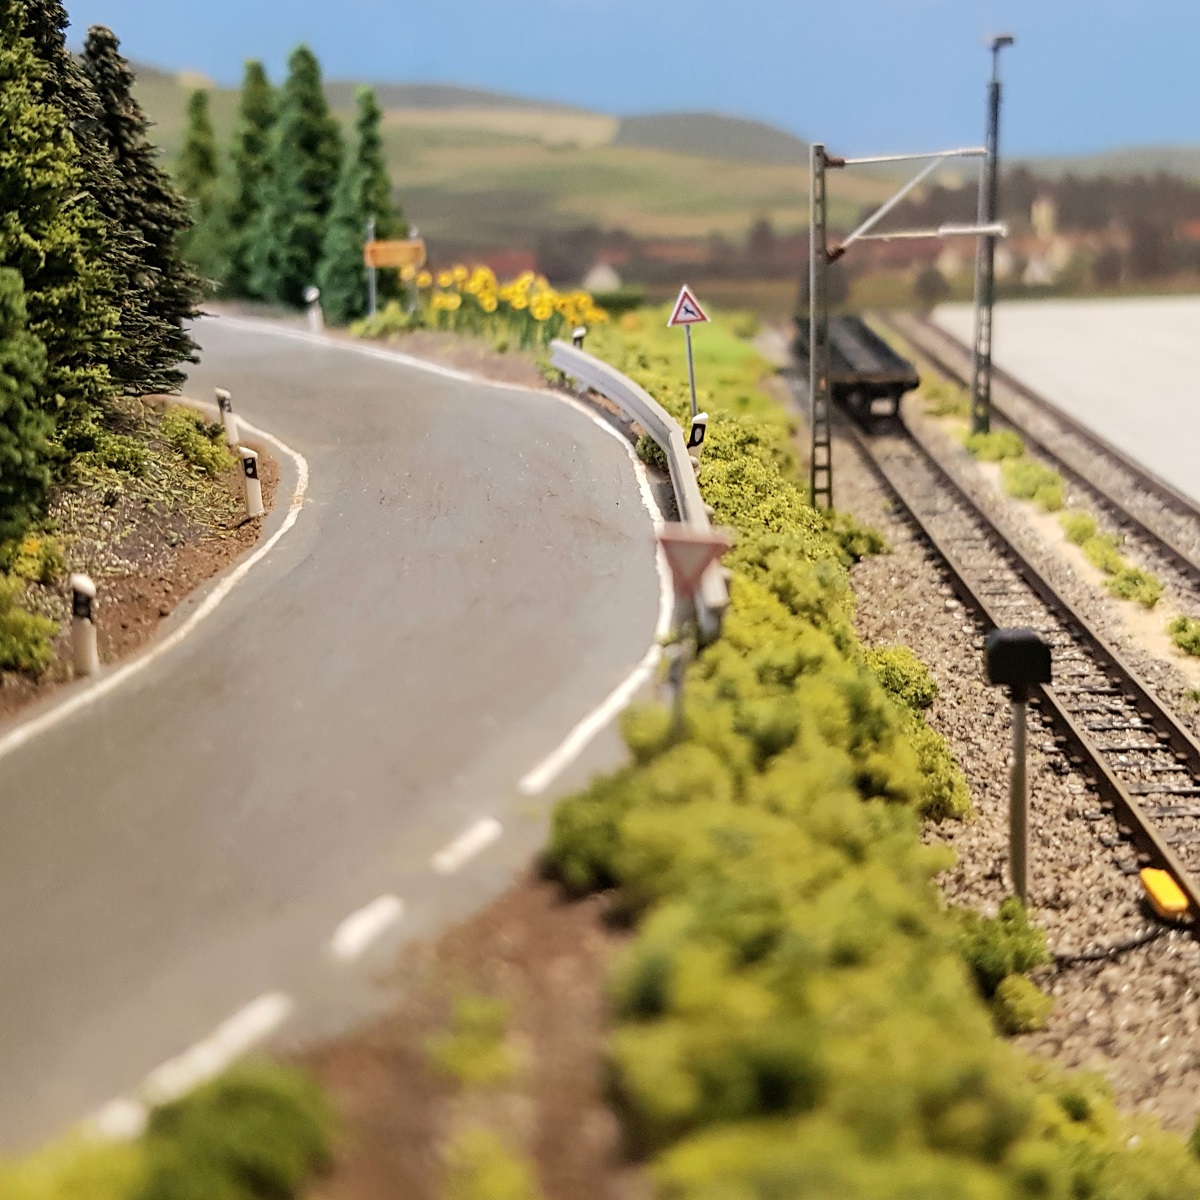 Model train layout, Small Layout for Taking Photos